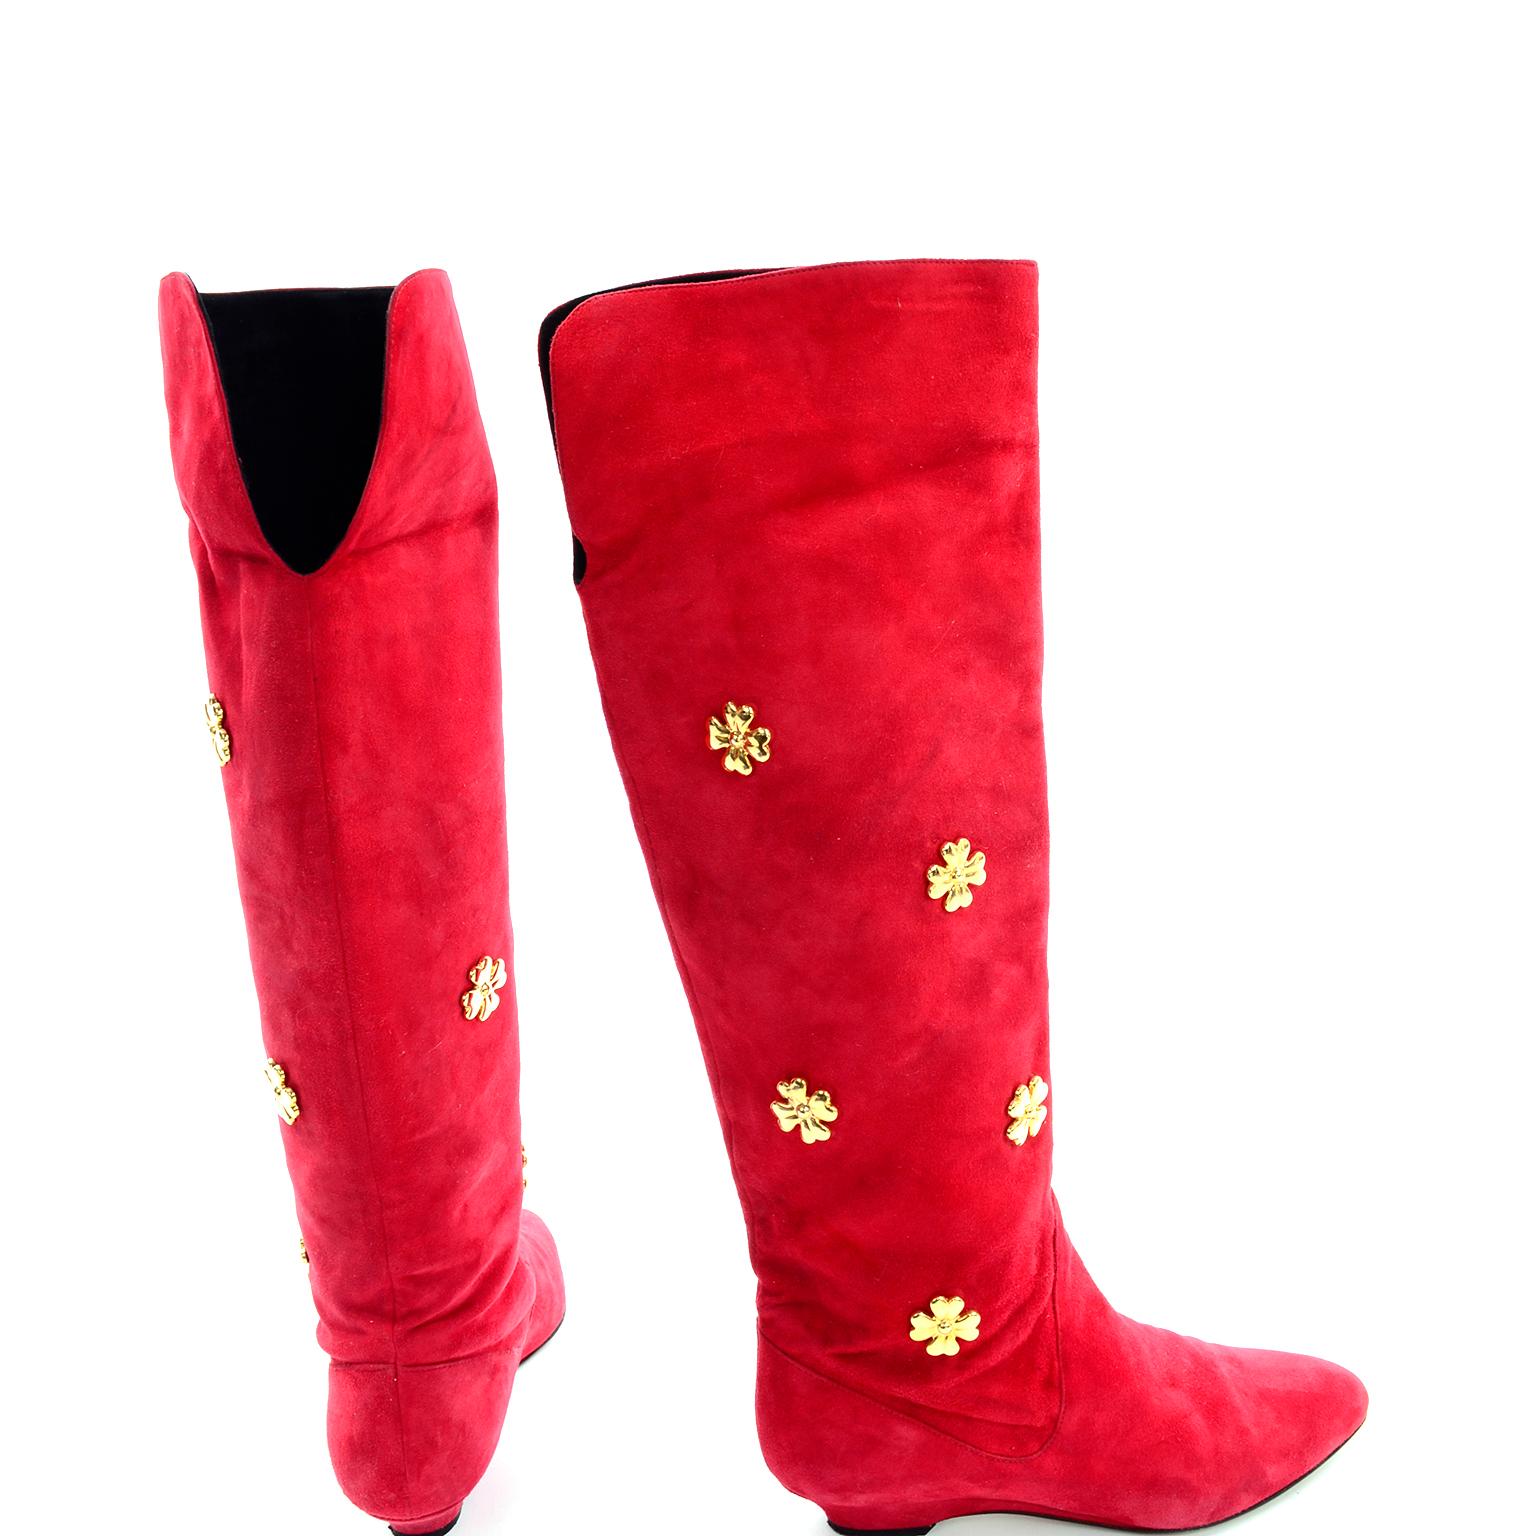 Women's Vintage 1980s Escada Red Suede Boots With Gold Metal Clovers Size 37